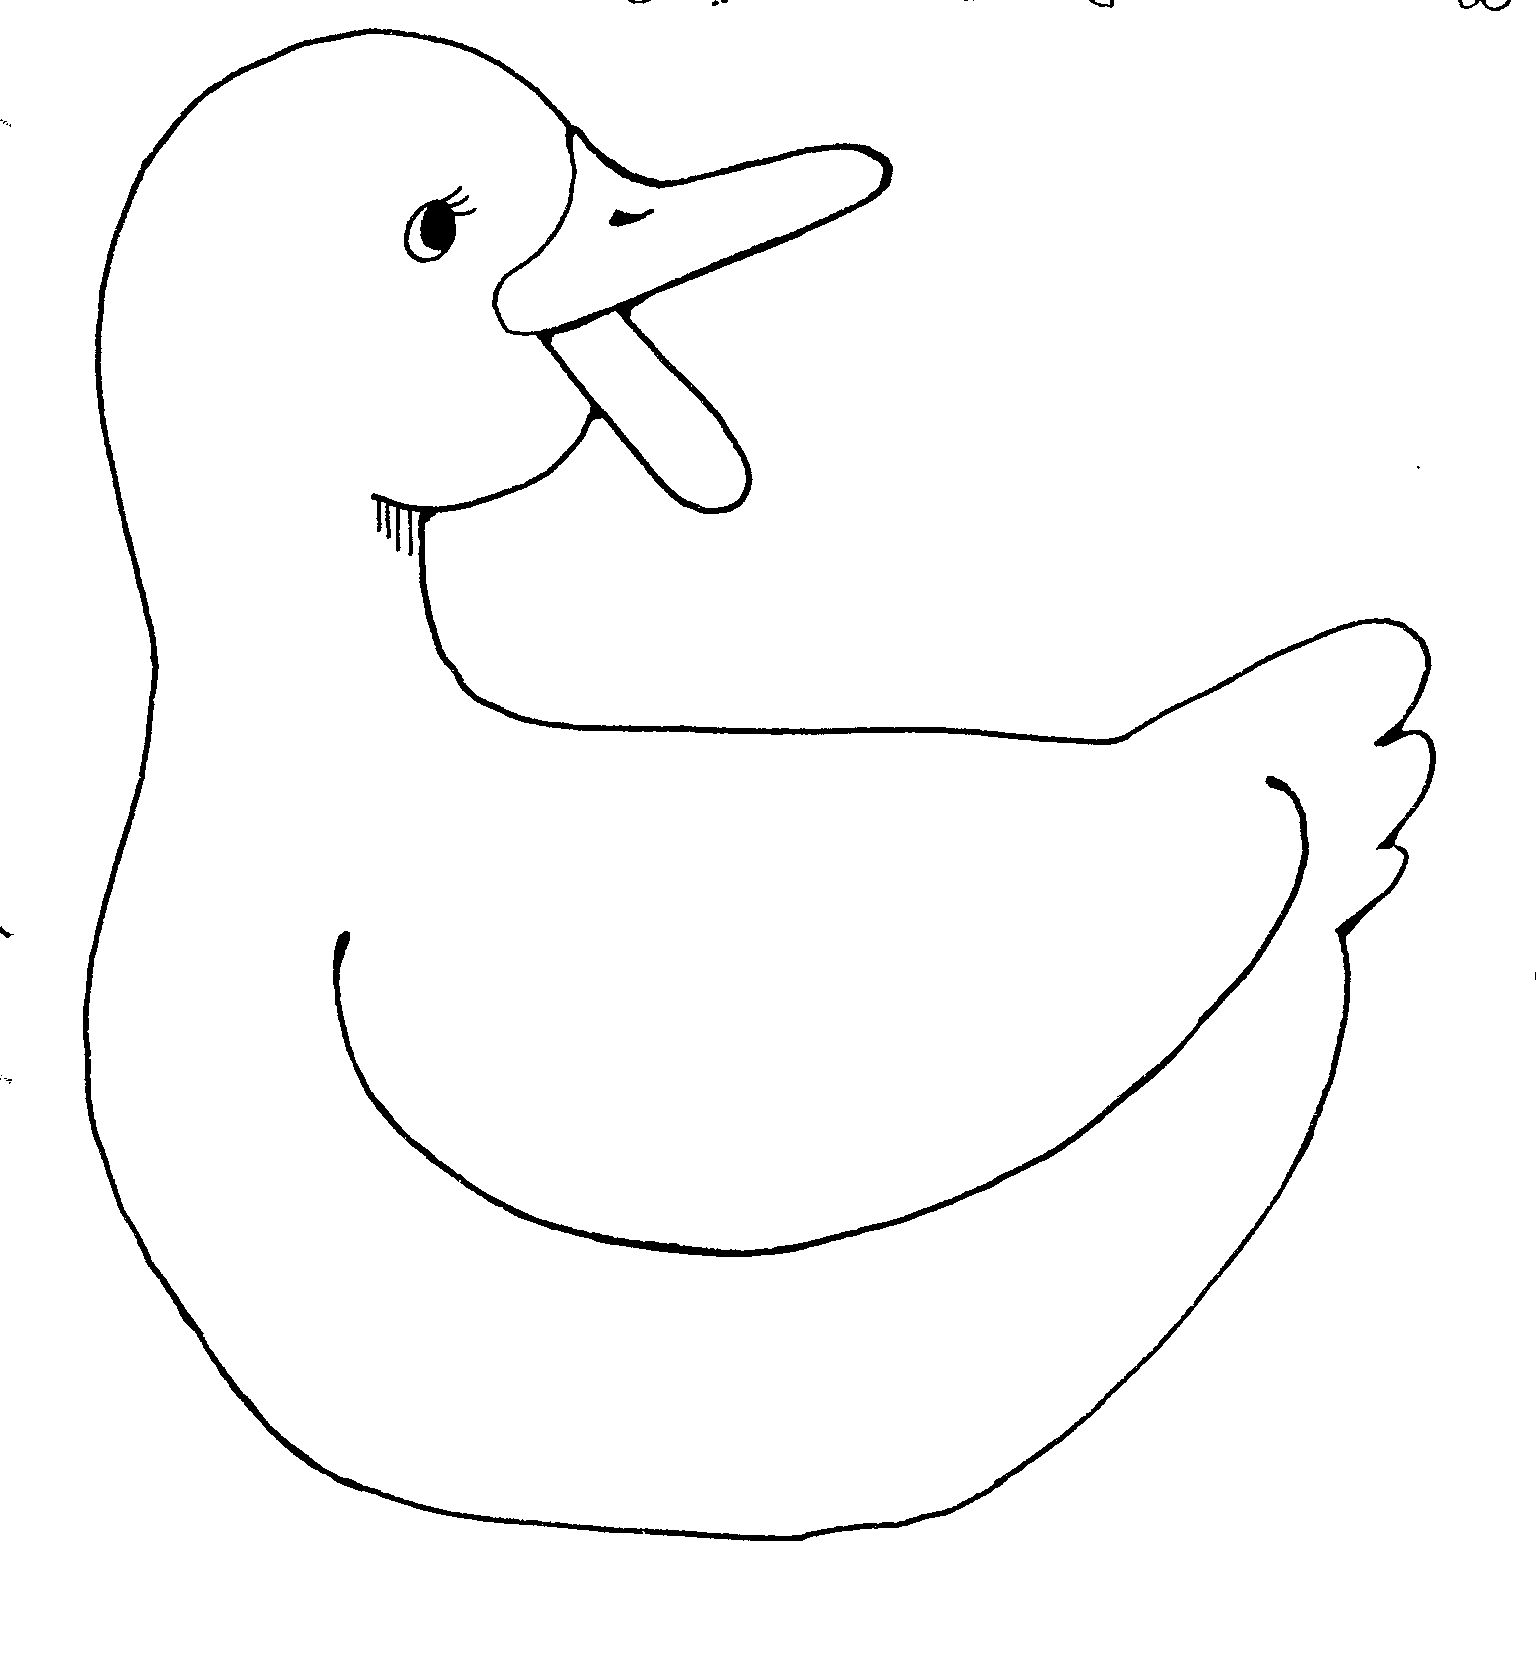 Mother duck black and. Ducks clipart object